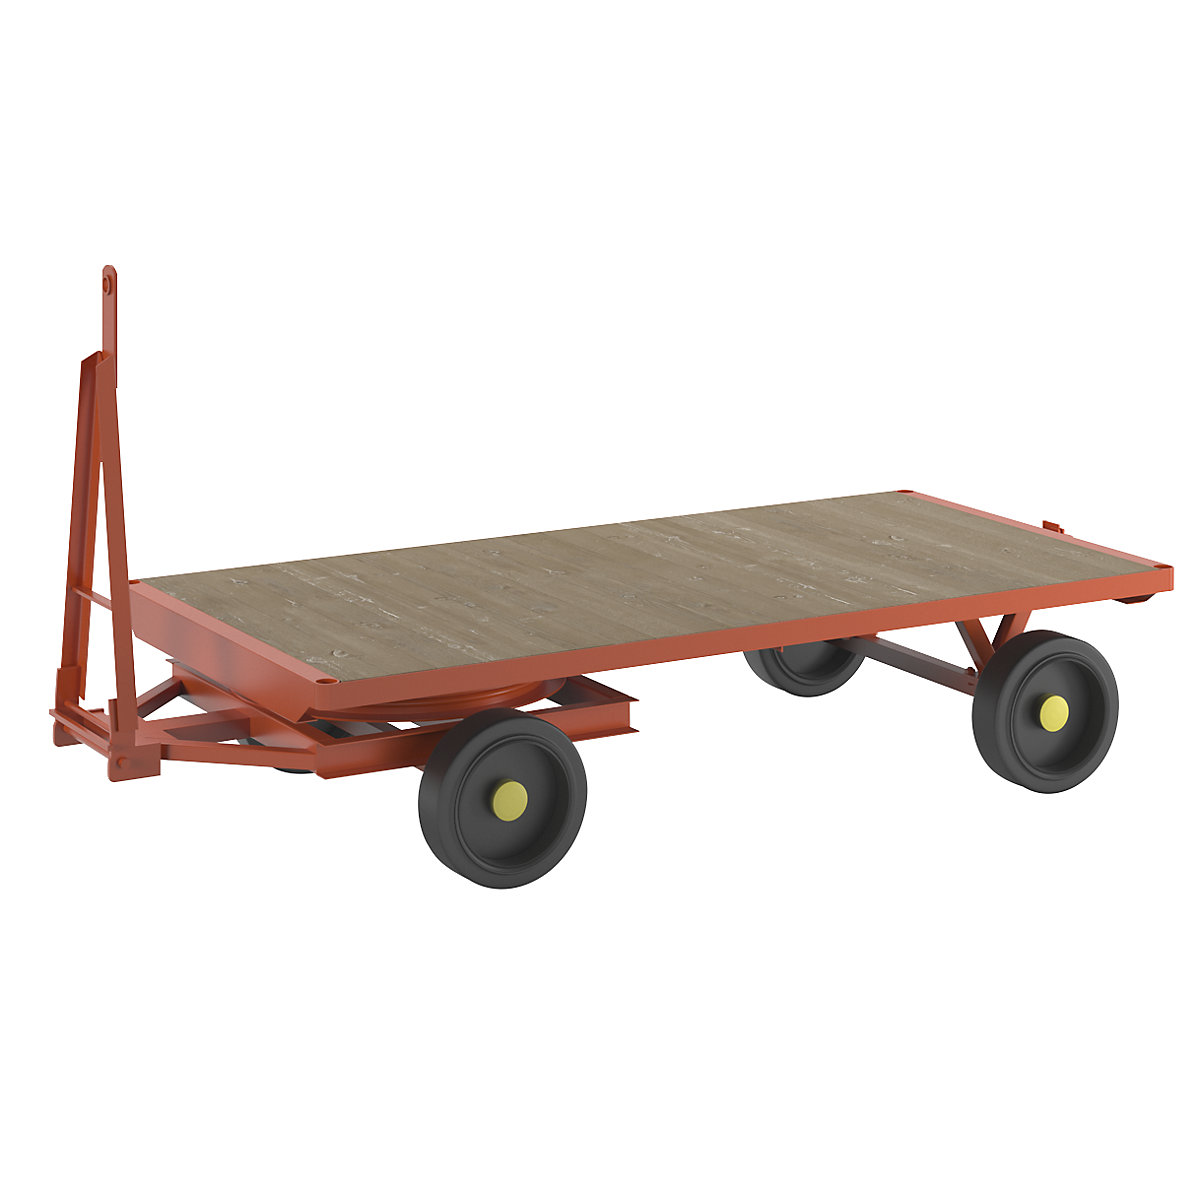 Trailer, 2-wheel turntable steering, max. load 5 t, platform 2.5 x 1.25 m, solid rubber tyres-15